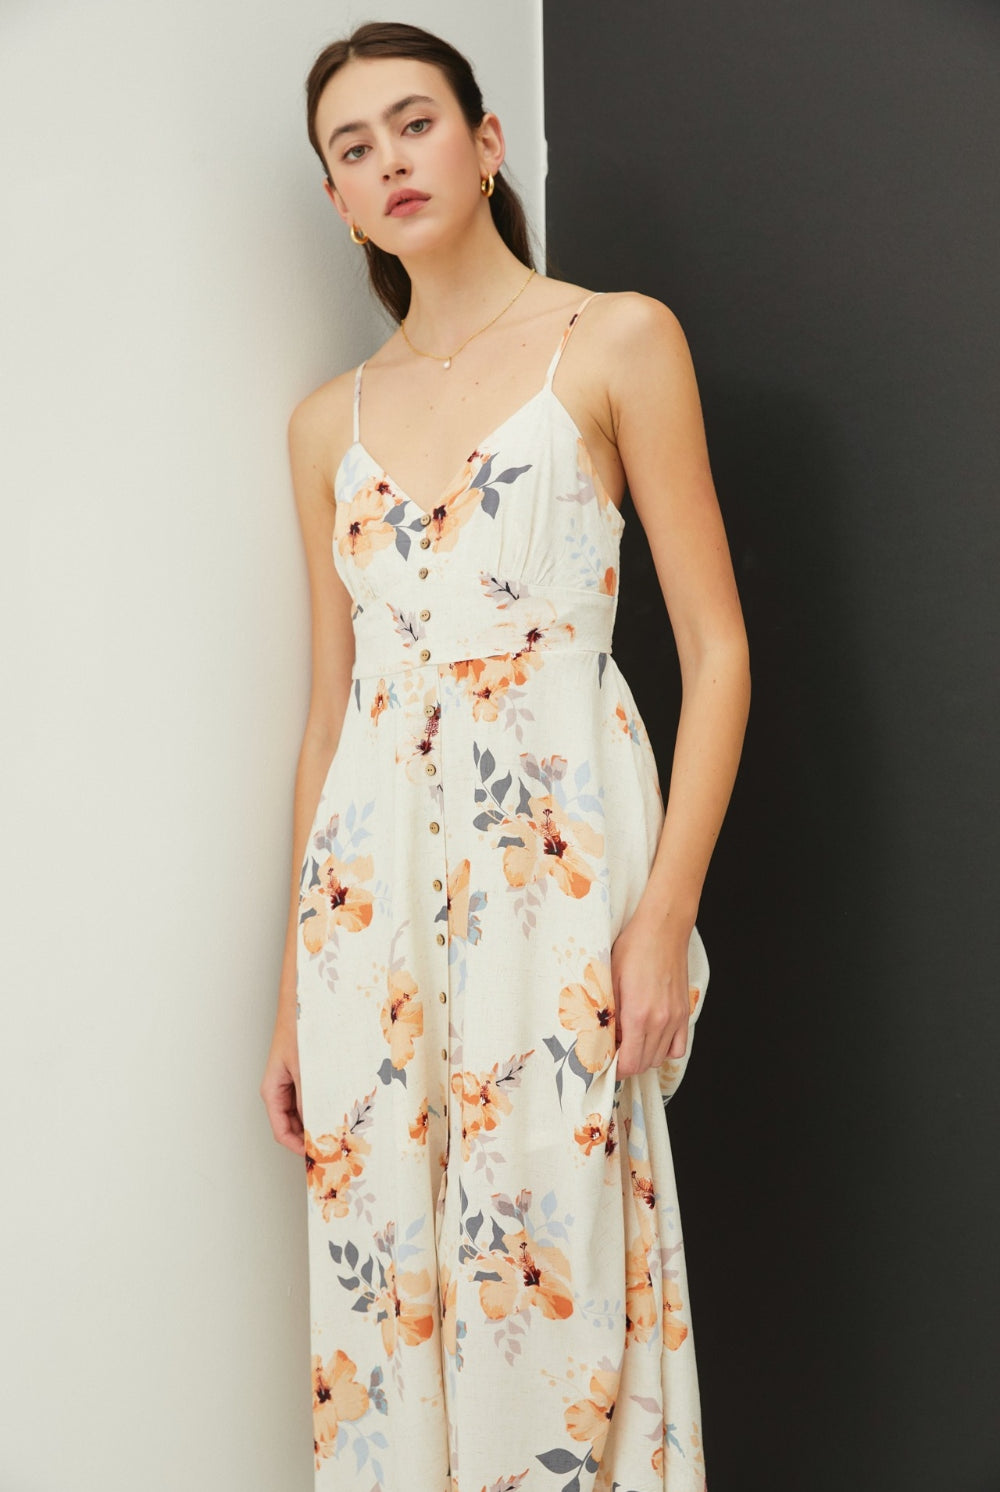 A model is gracefully poised in a botanical print midi dress with a button-front detail, adjustable straps, and a flared skirt, exemplifying casual elegance.